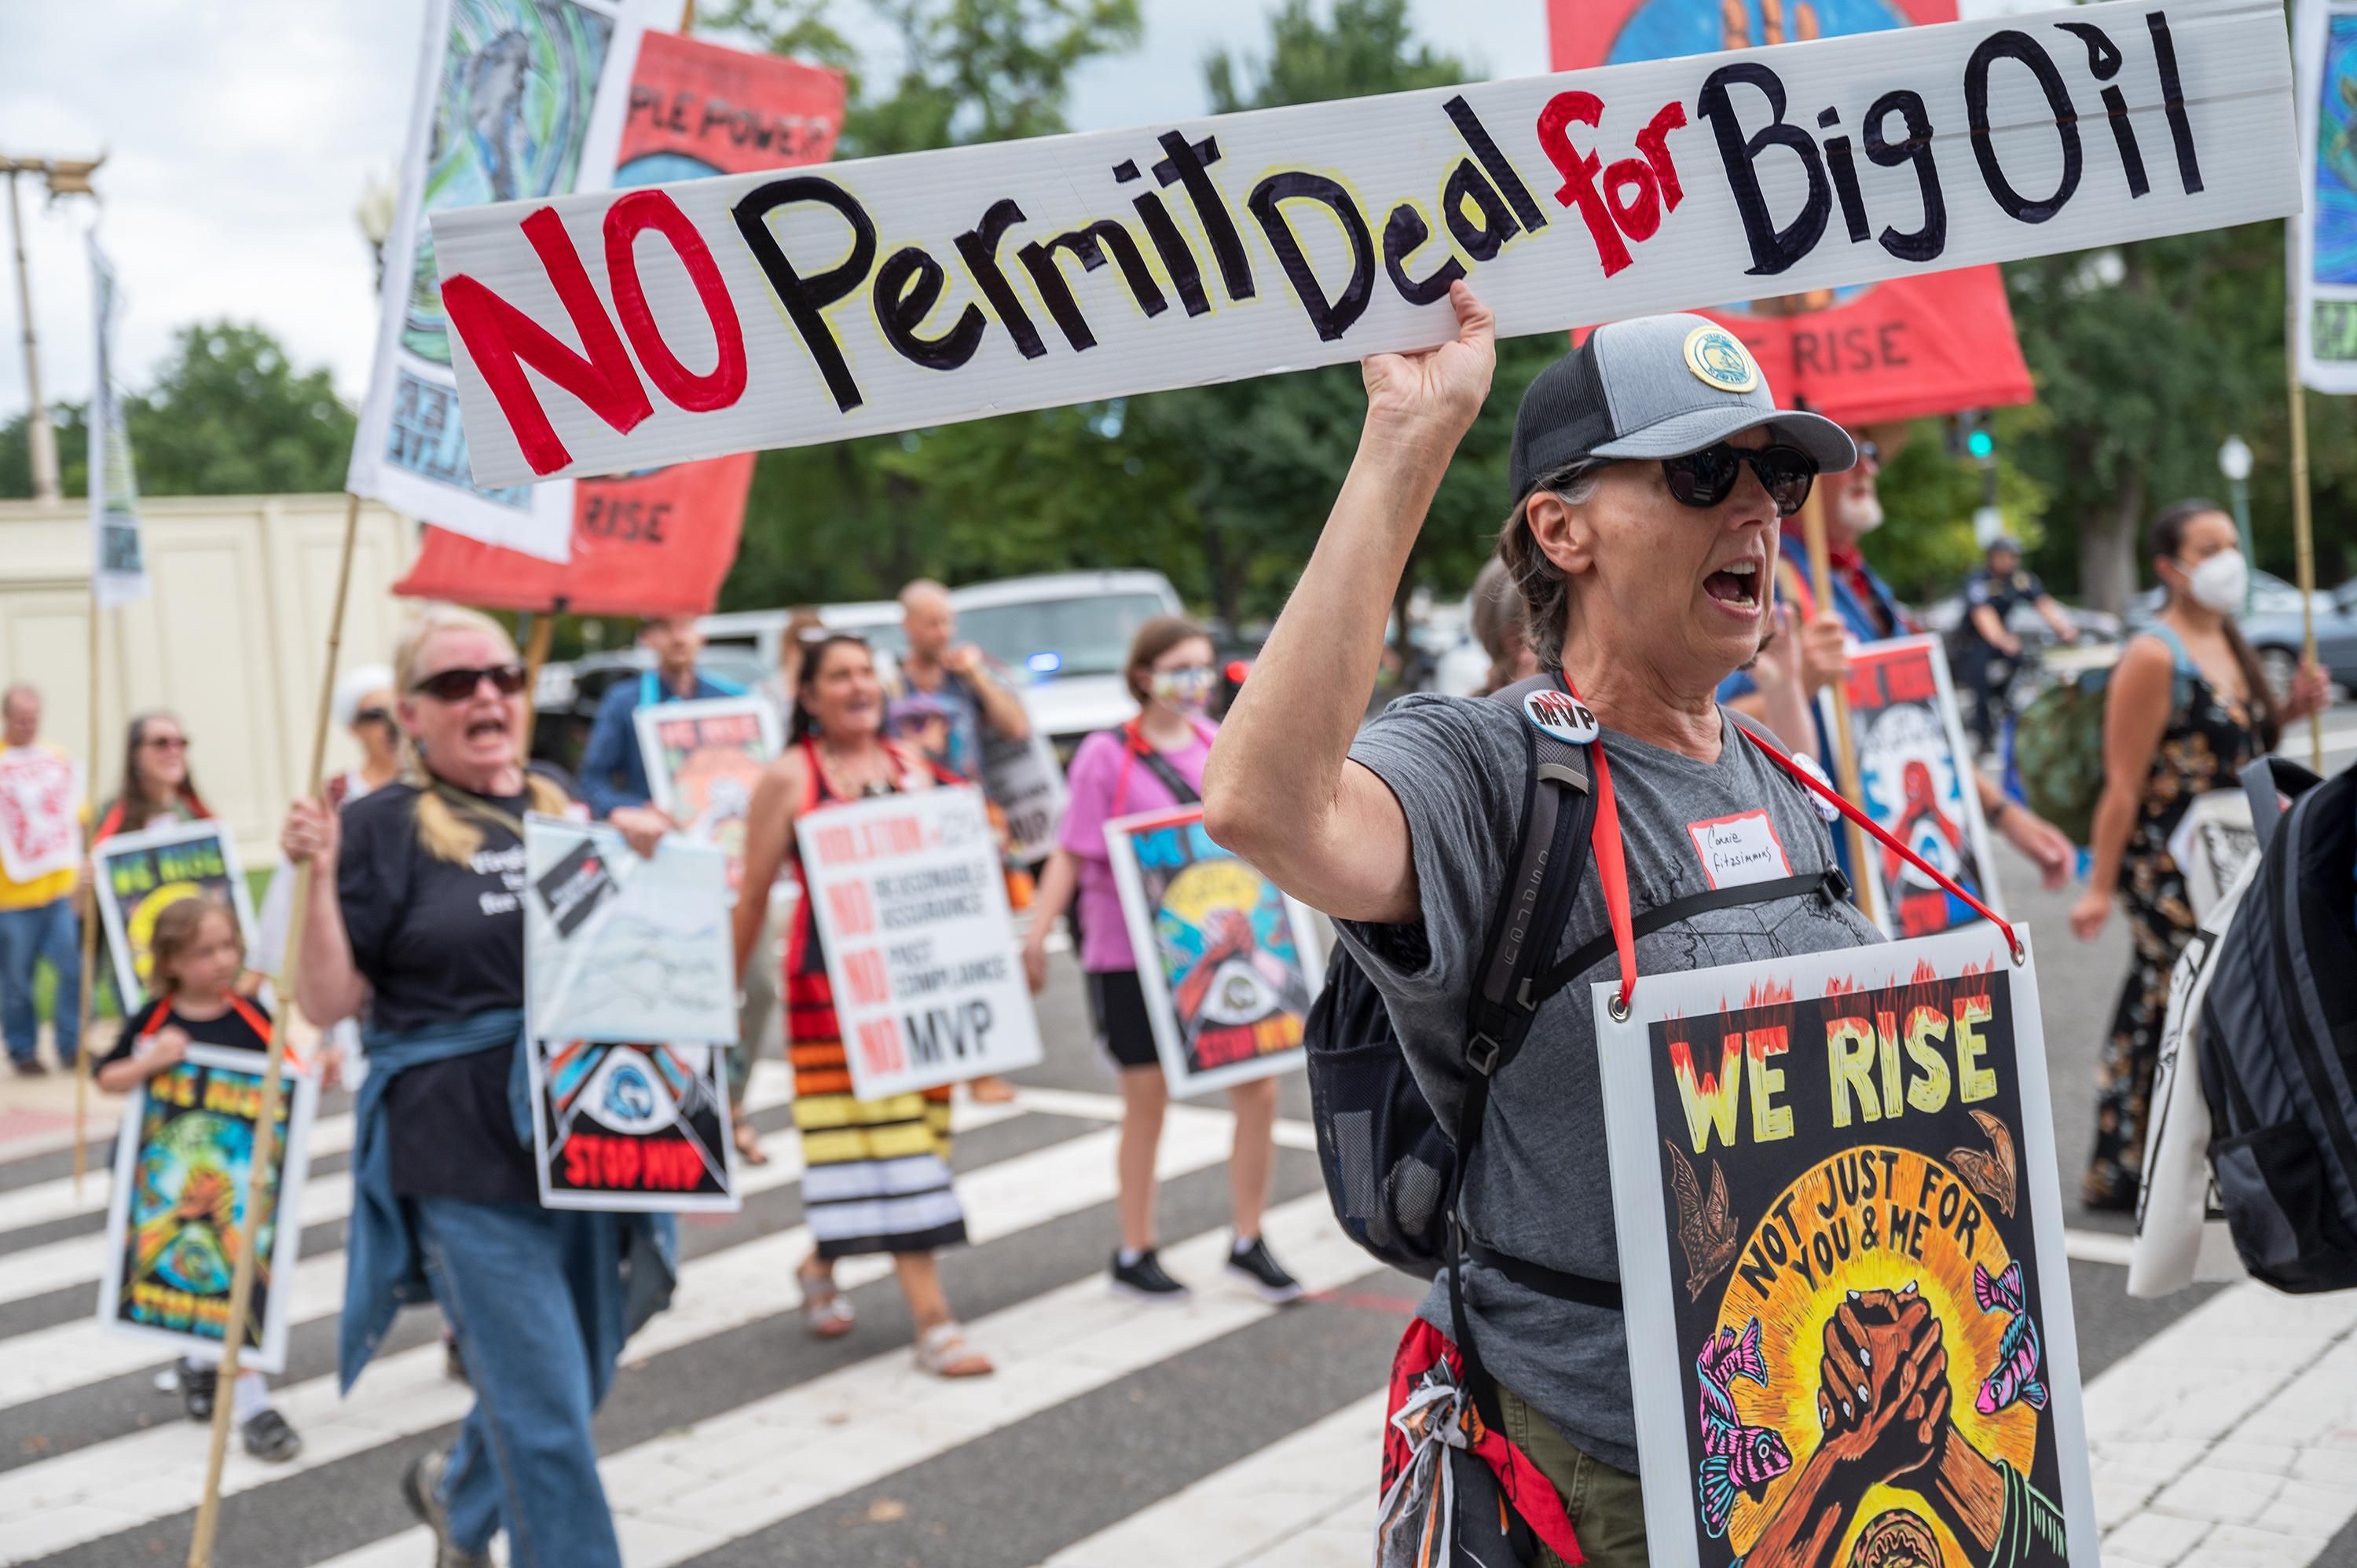 No Permit Deal for Big Oil sign